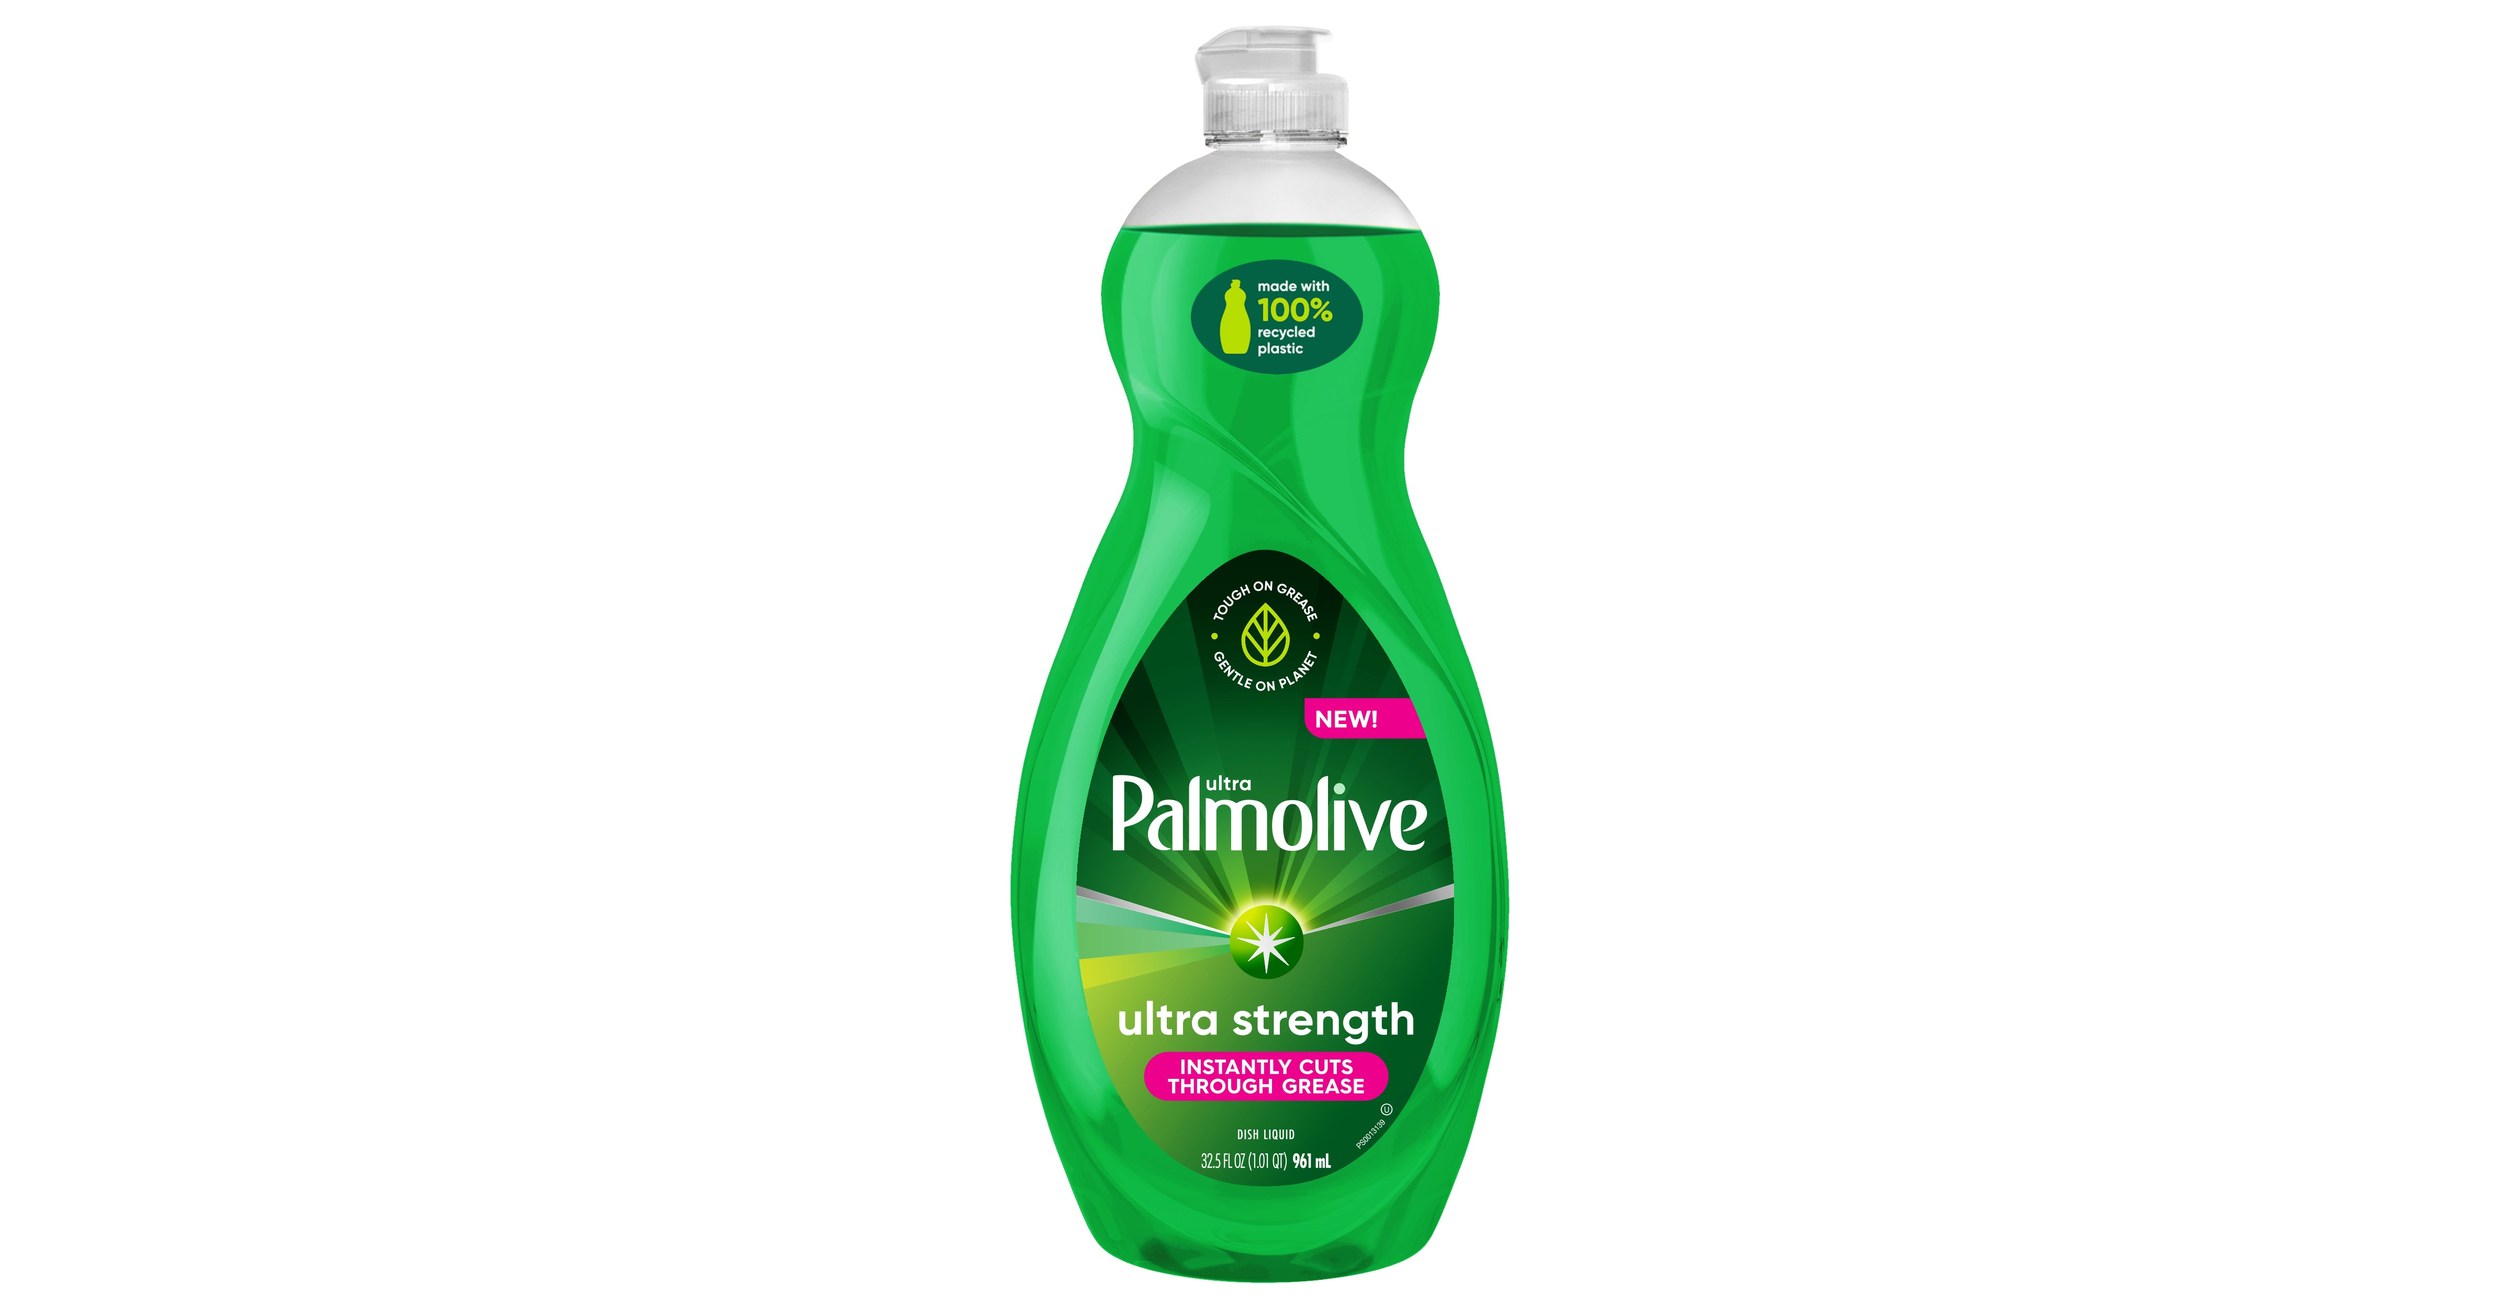 Palmolive Ultra Re-Launches Dish Soap in 100% Post-Consumer